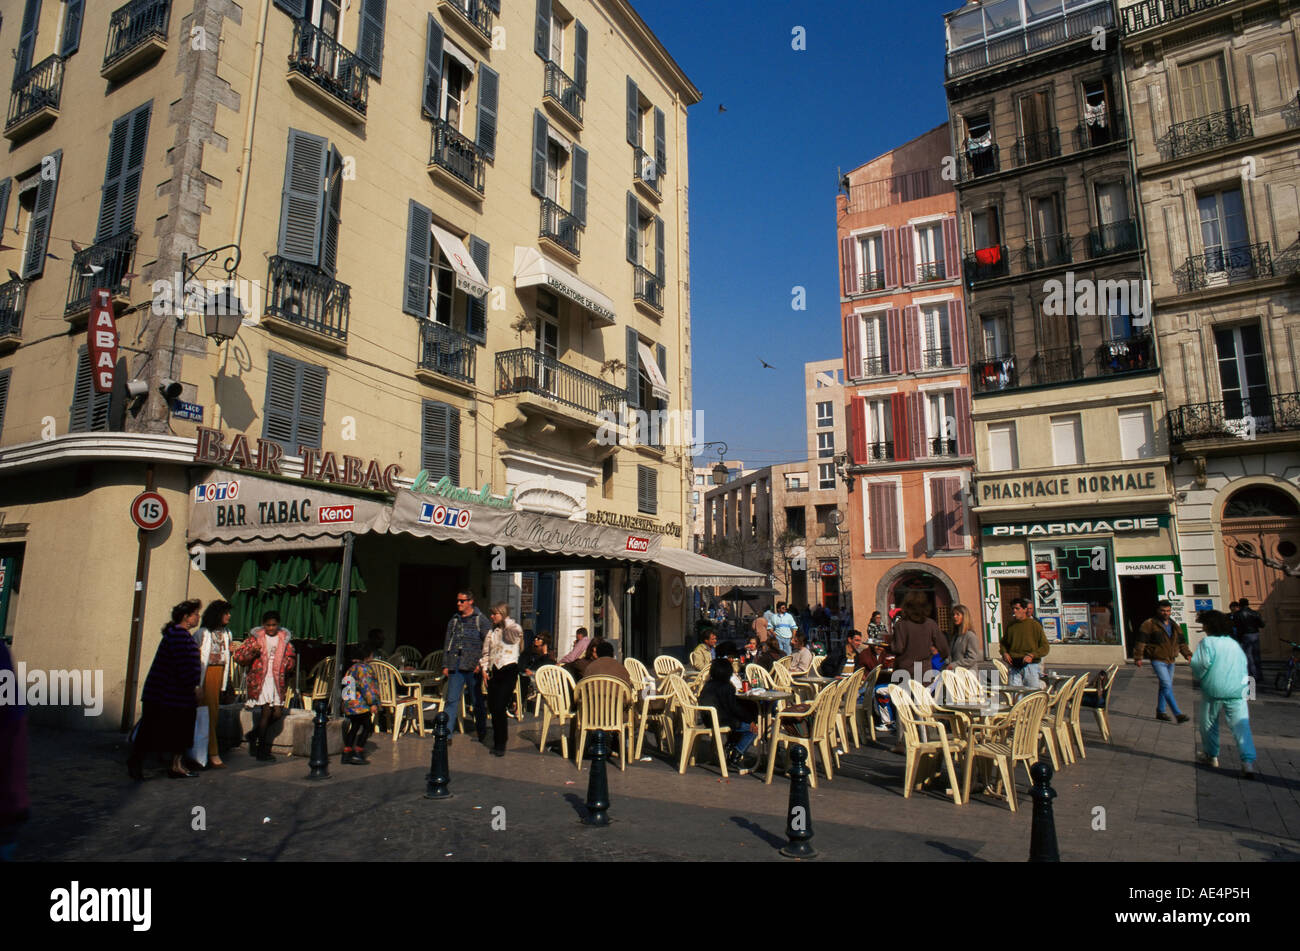 Outdoor cafe in city centre, Toulon, Var, Cote d'Azur, Provence, France, Mediterranean, Europe Stock Photo